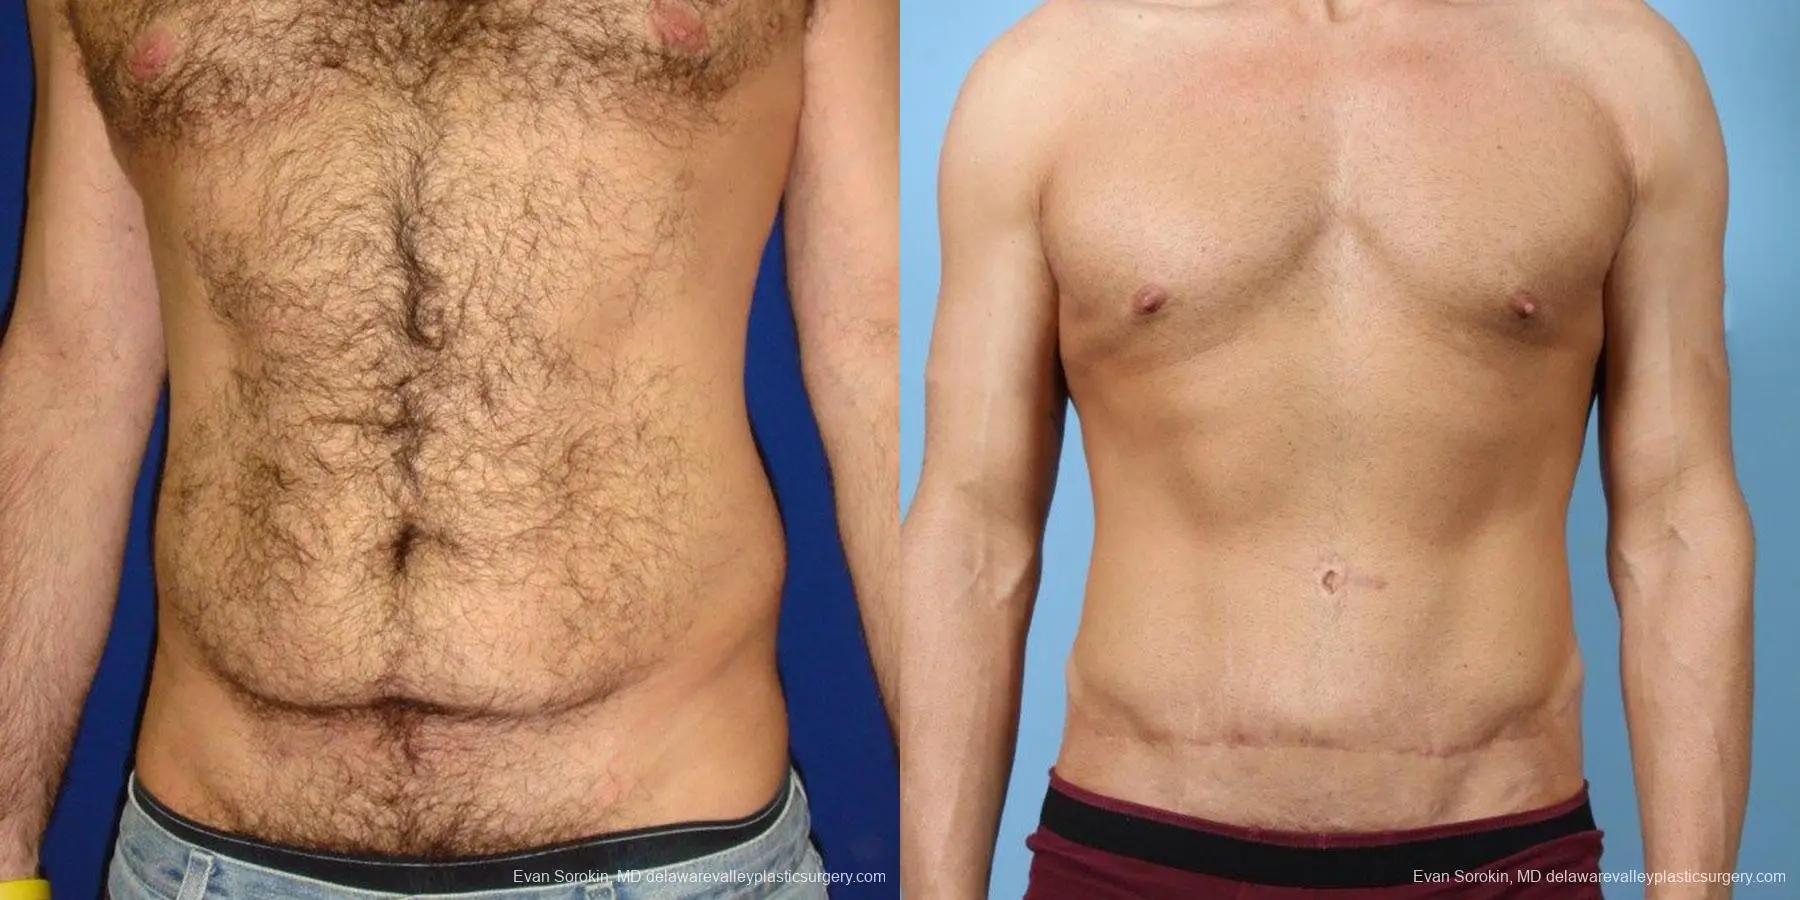 Patient #6023 Male Tummy Tuck (abdominoplasty) Before and After